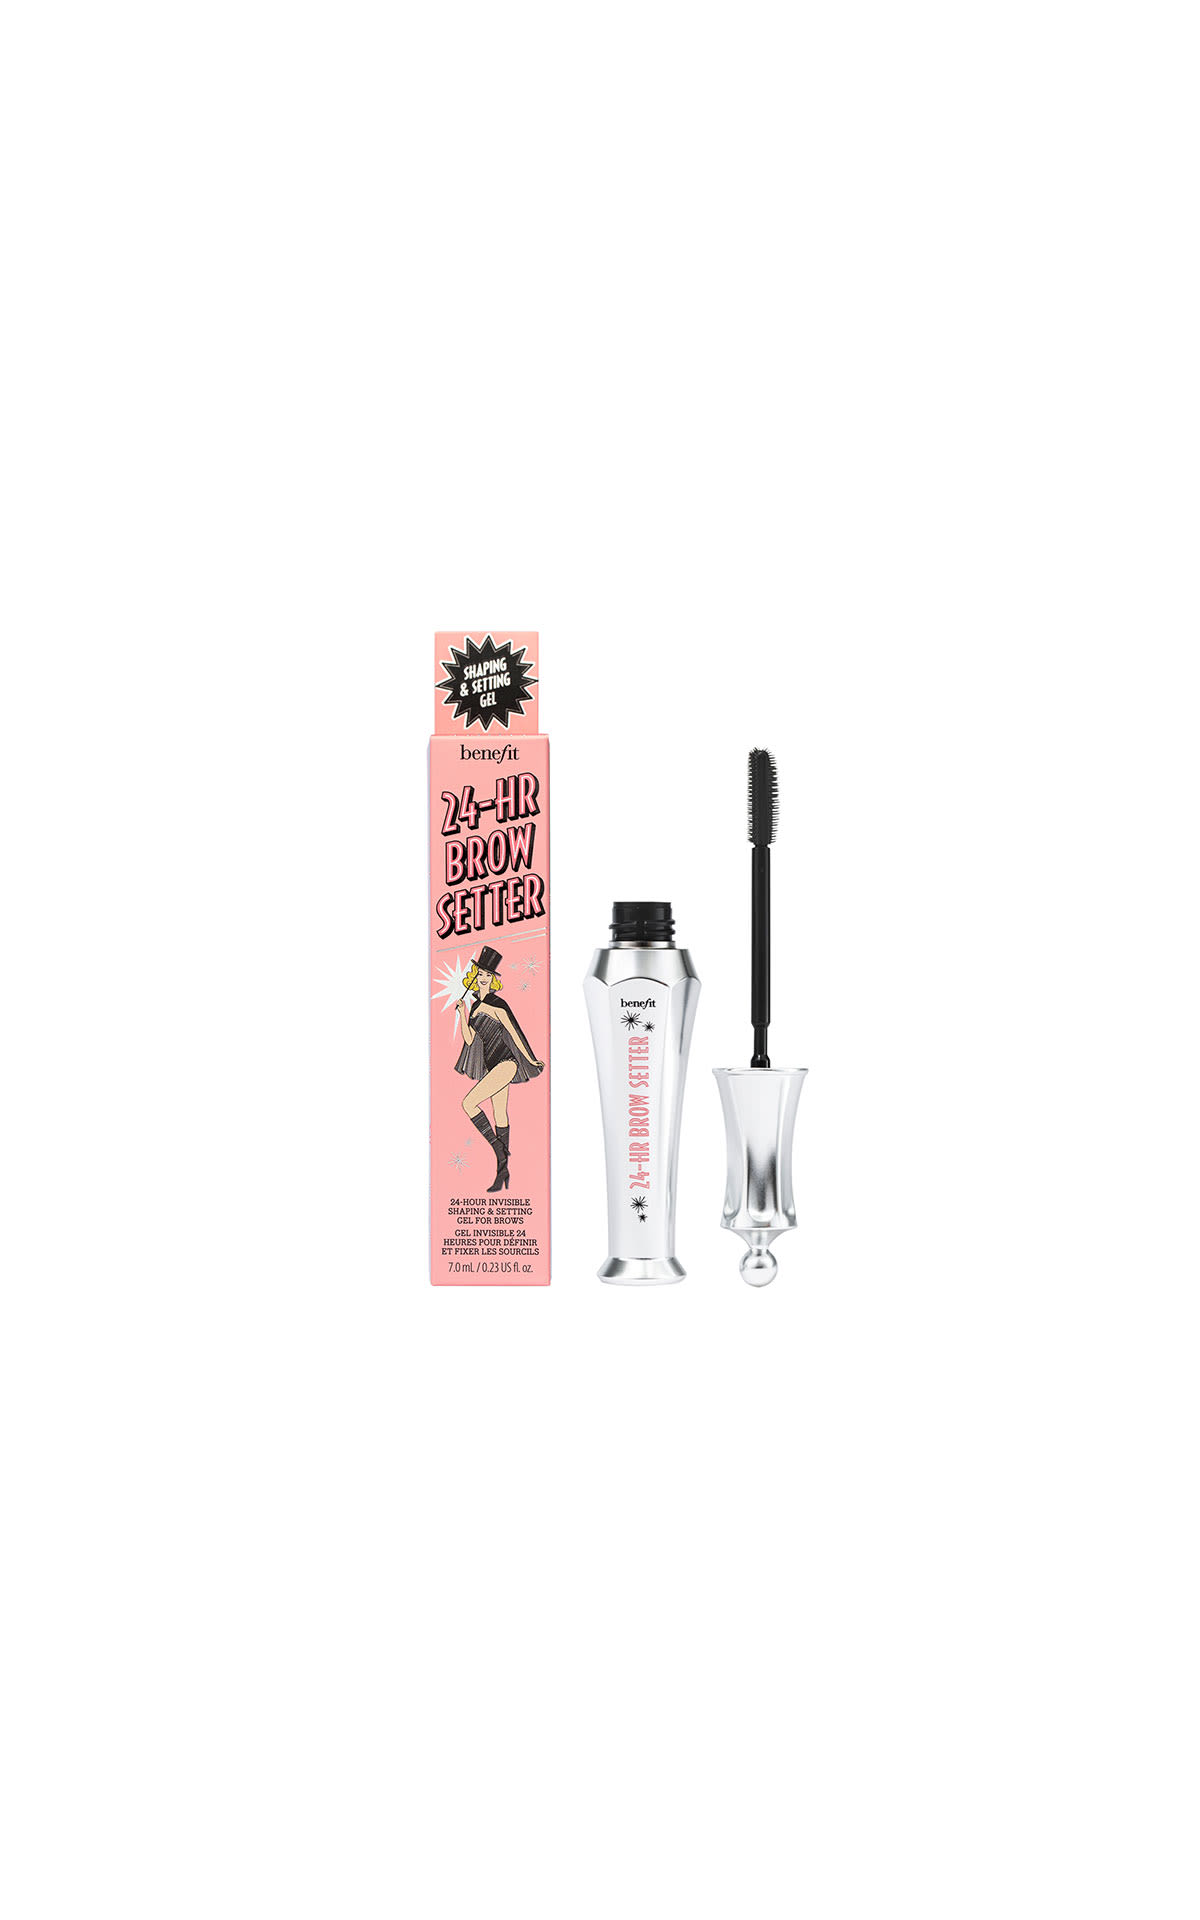 Benefit Cosmetics 24hr Brow setter  from Bicester Village